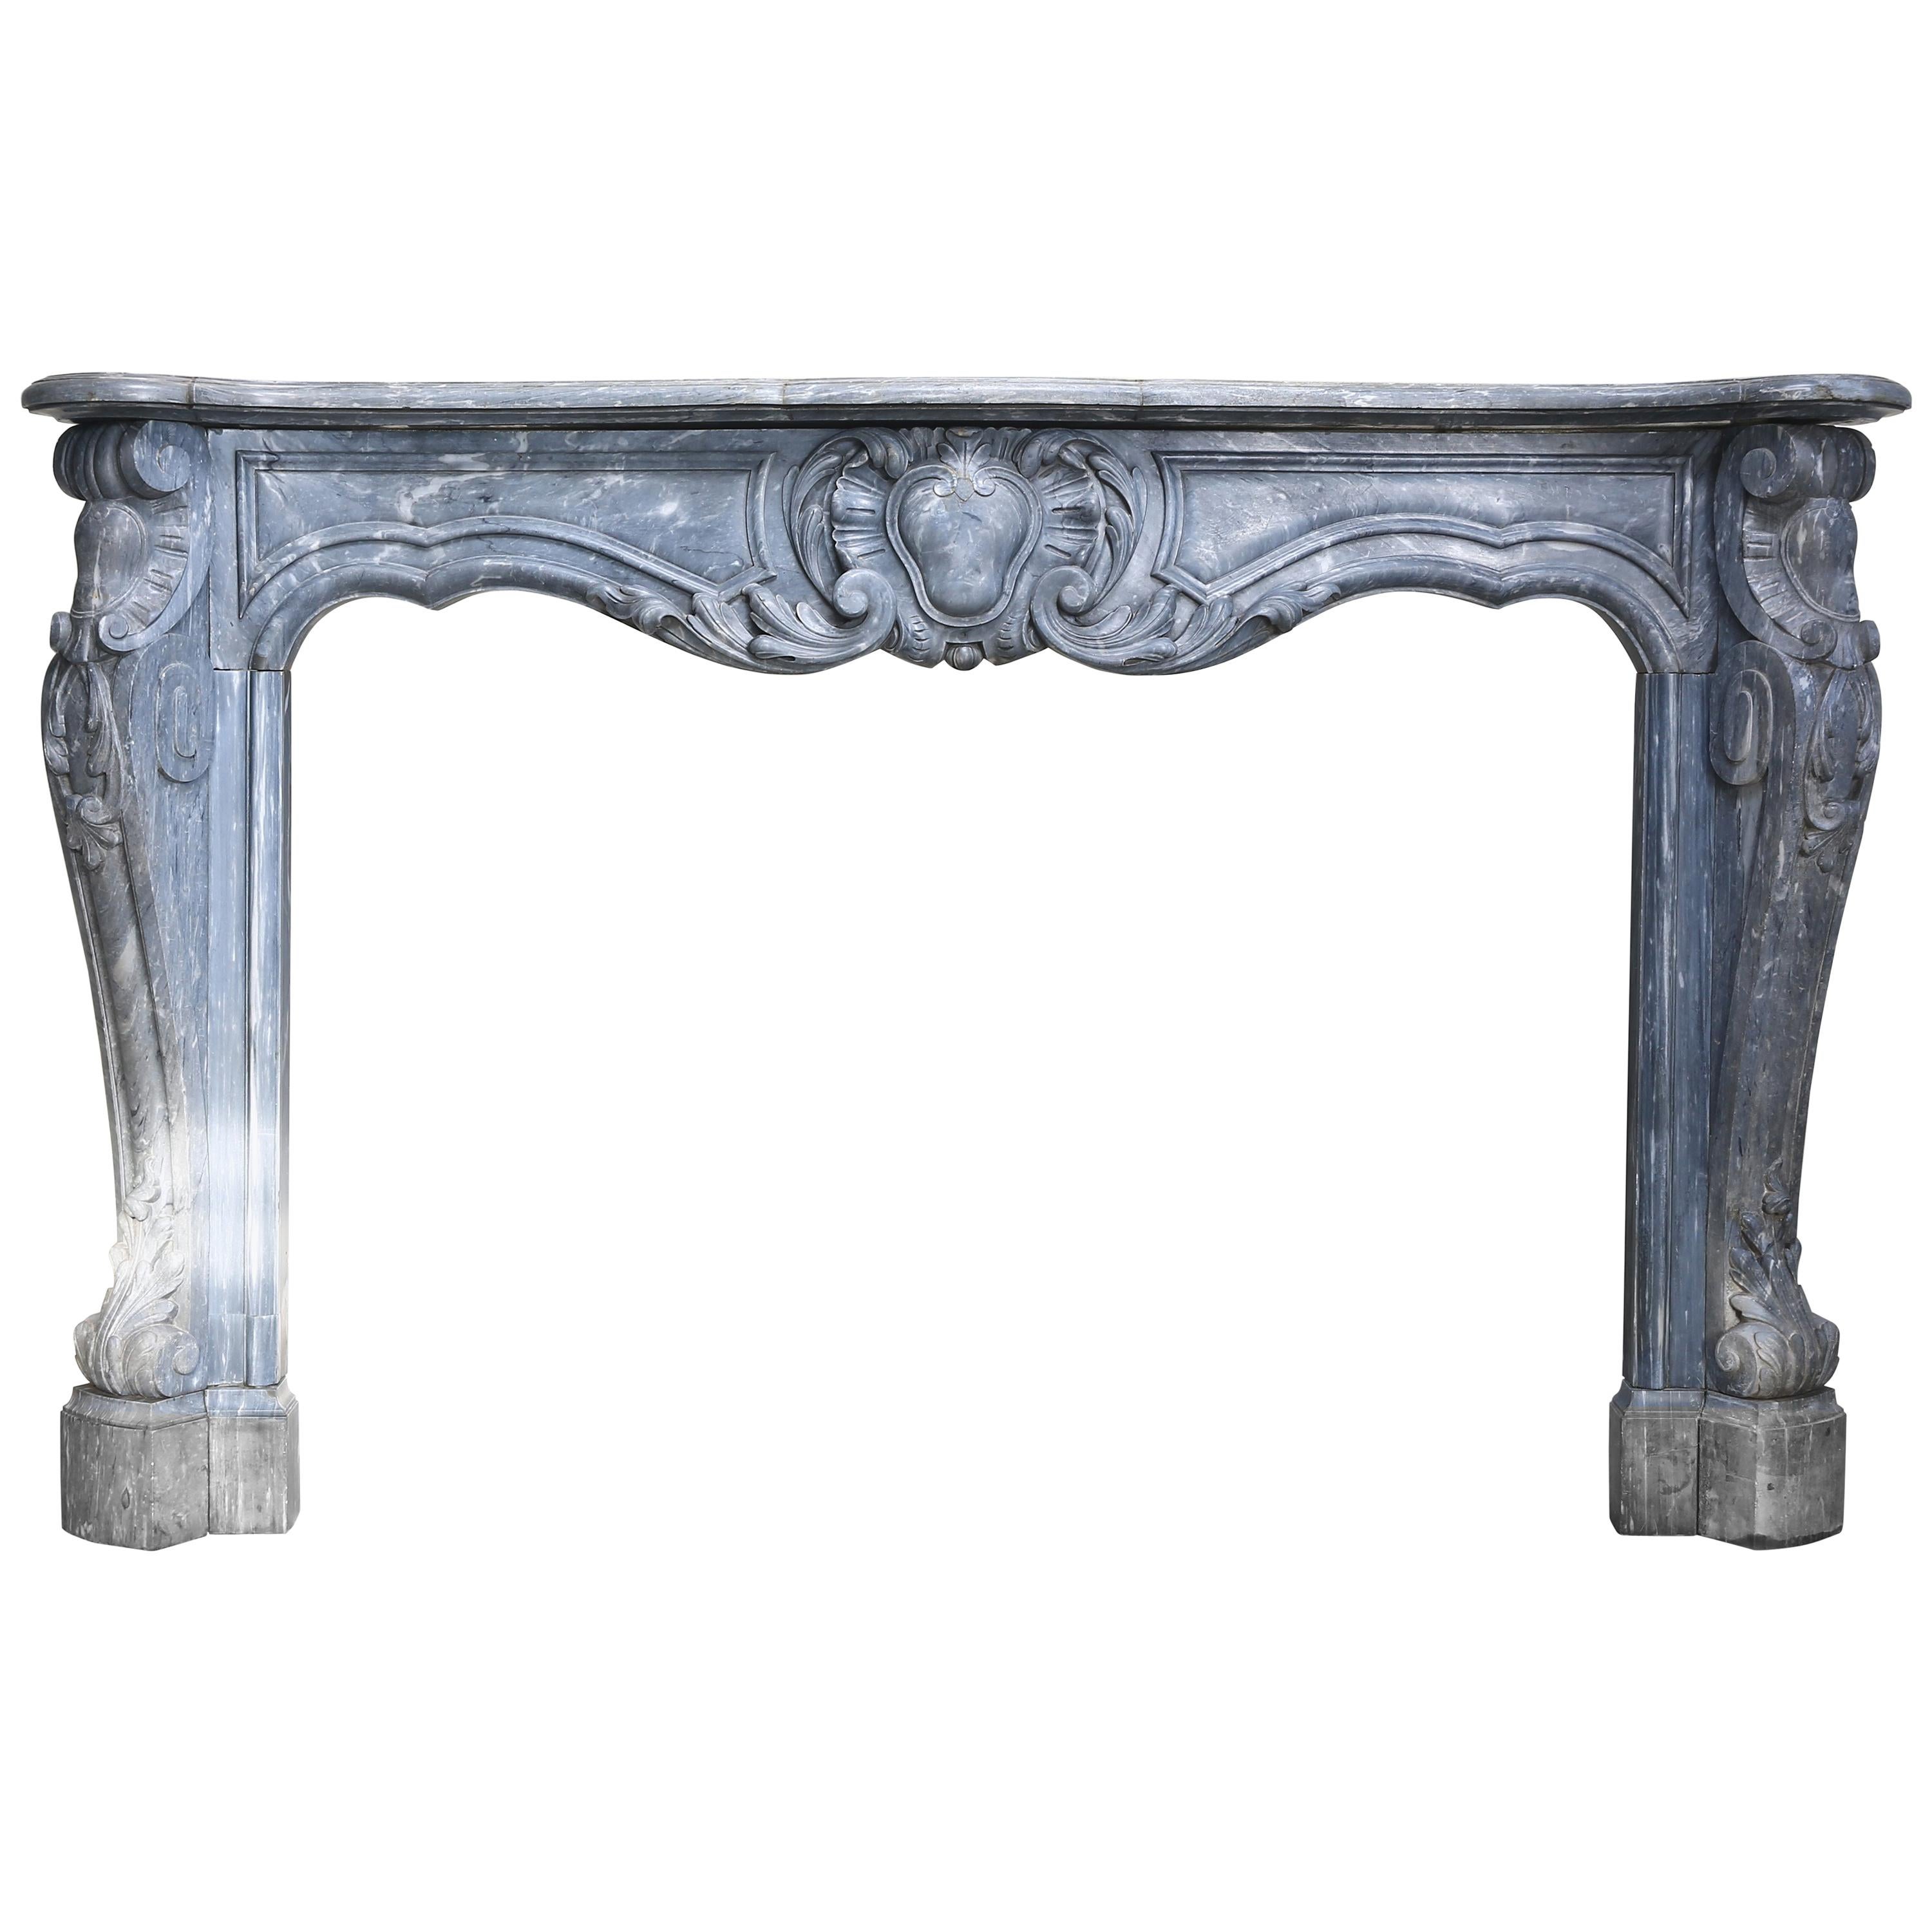 Antique Grey/Blue Marble Fireplace, 18th Century, Louis XV